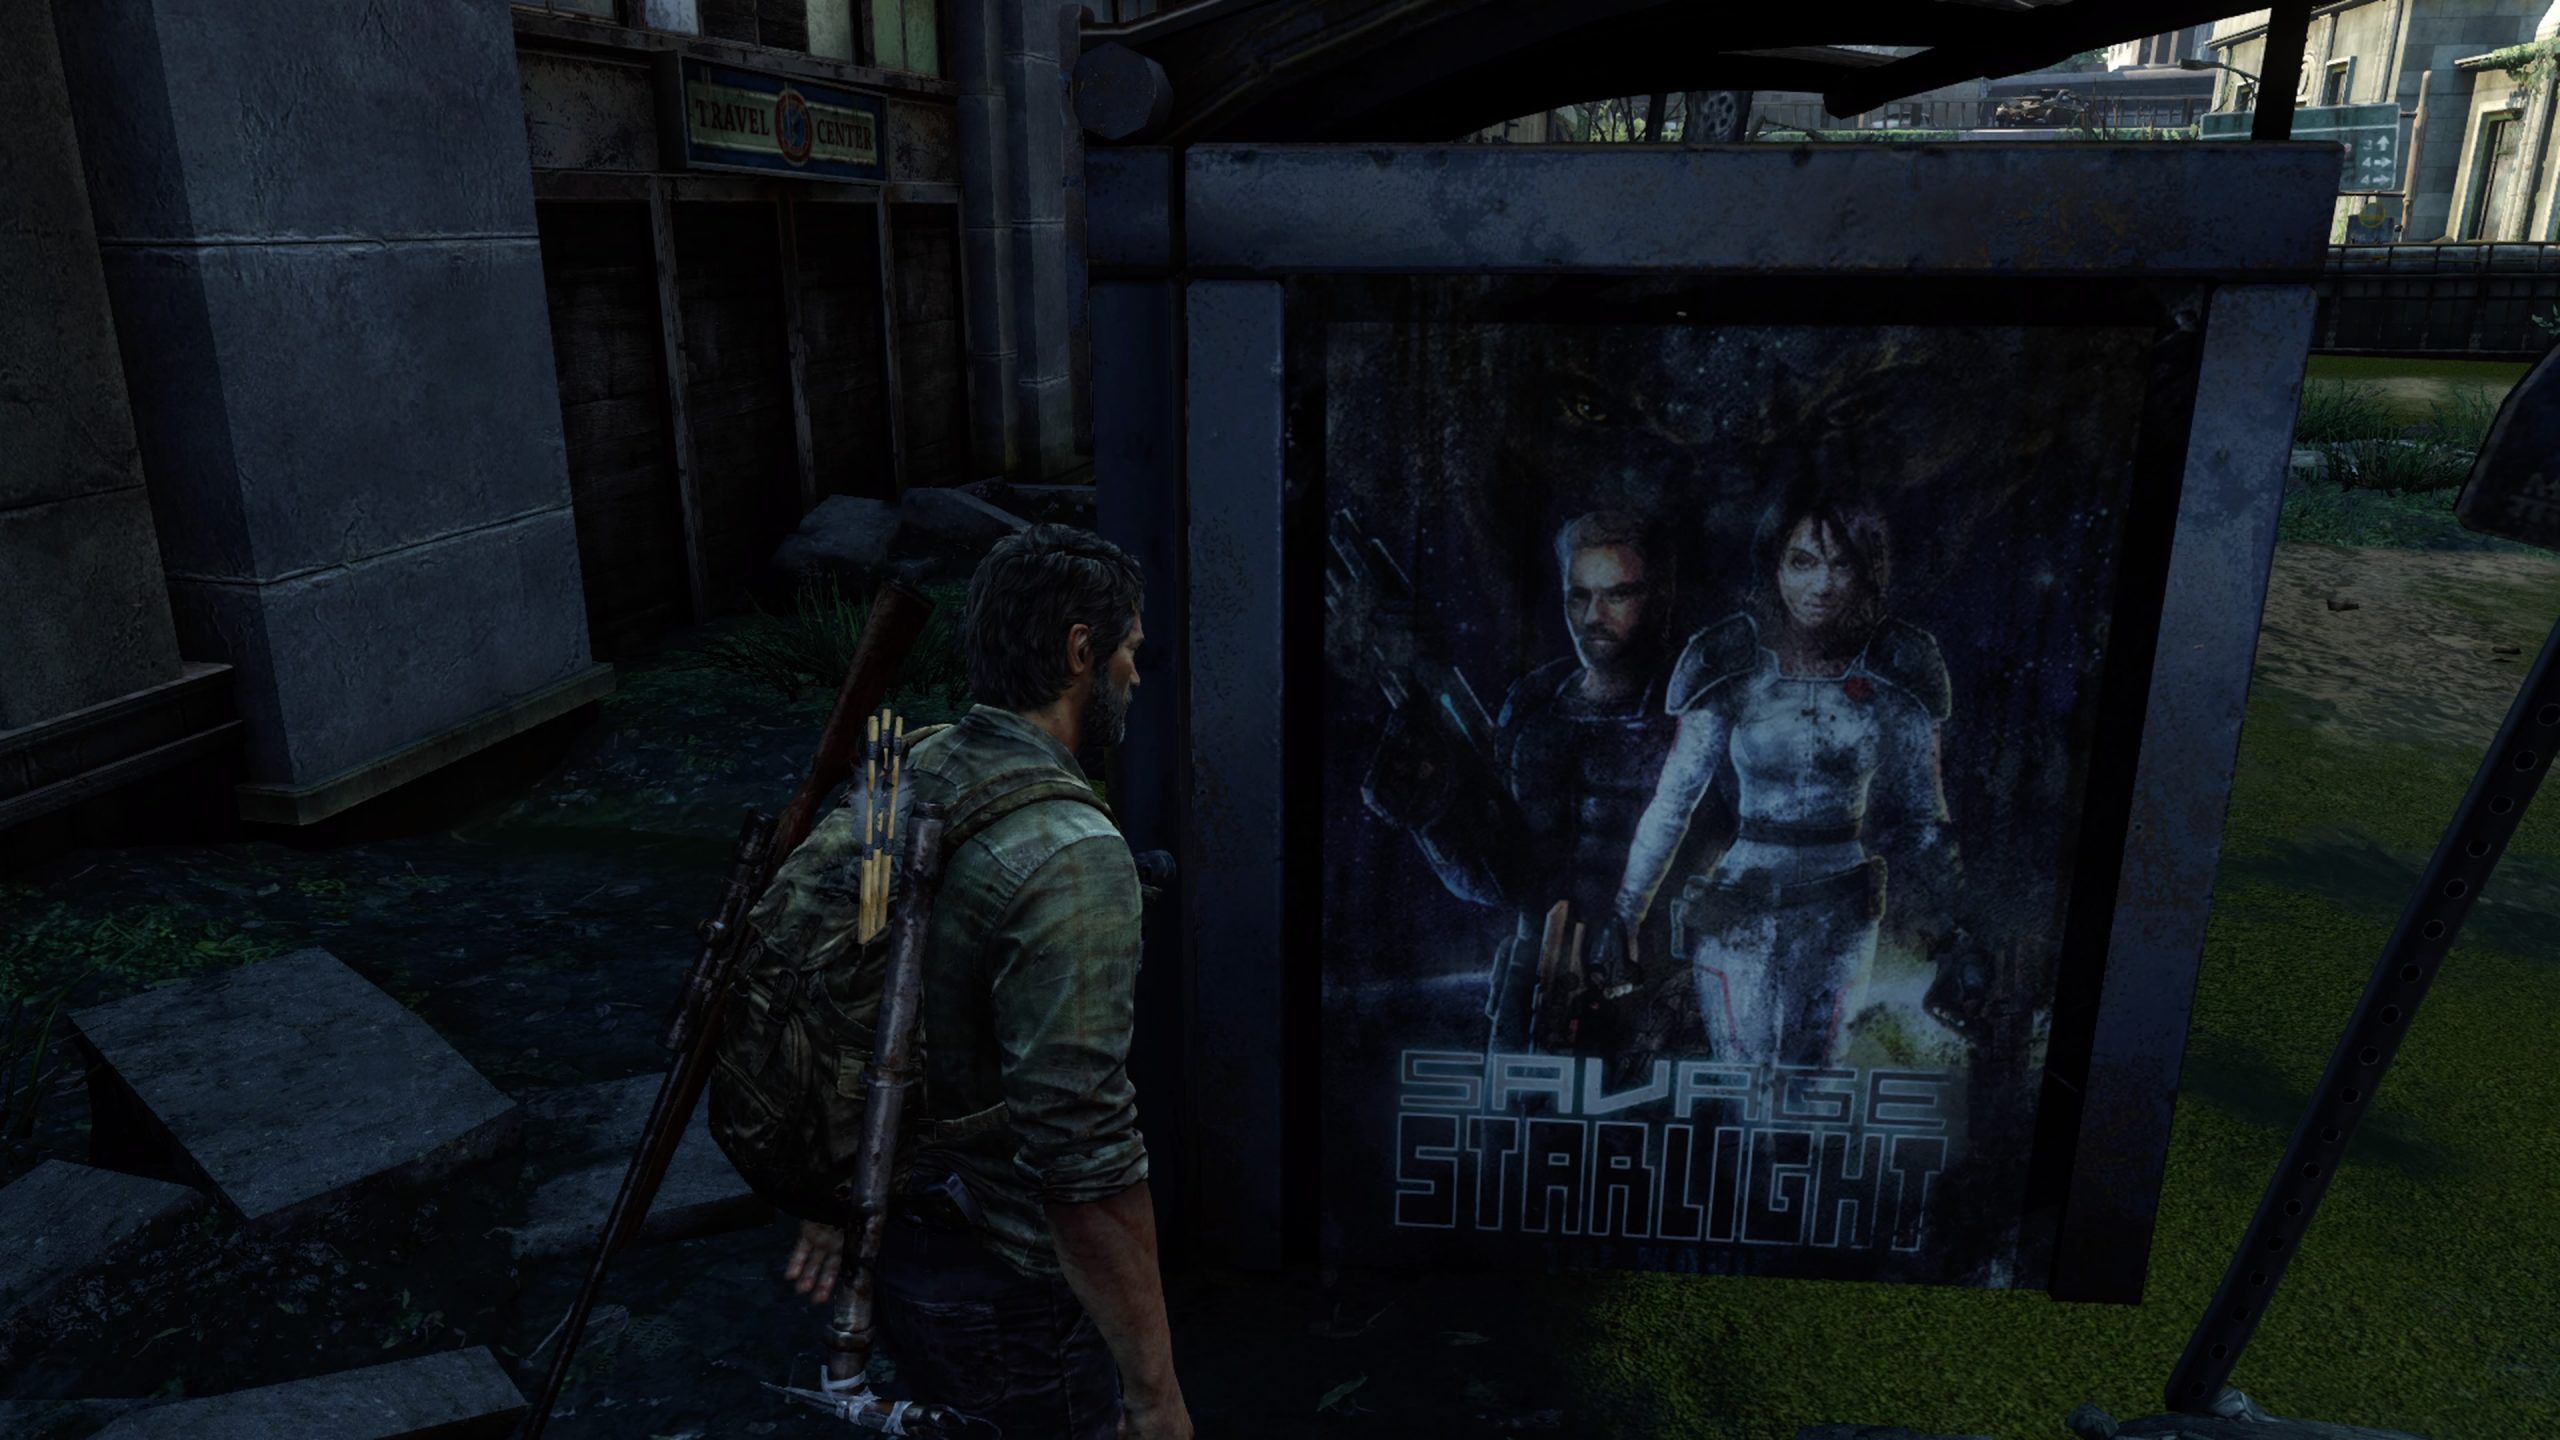 Review: The Last of Us Episode 4 - “Please Hold My Hand”